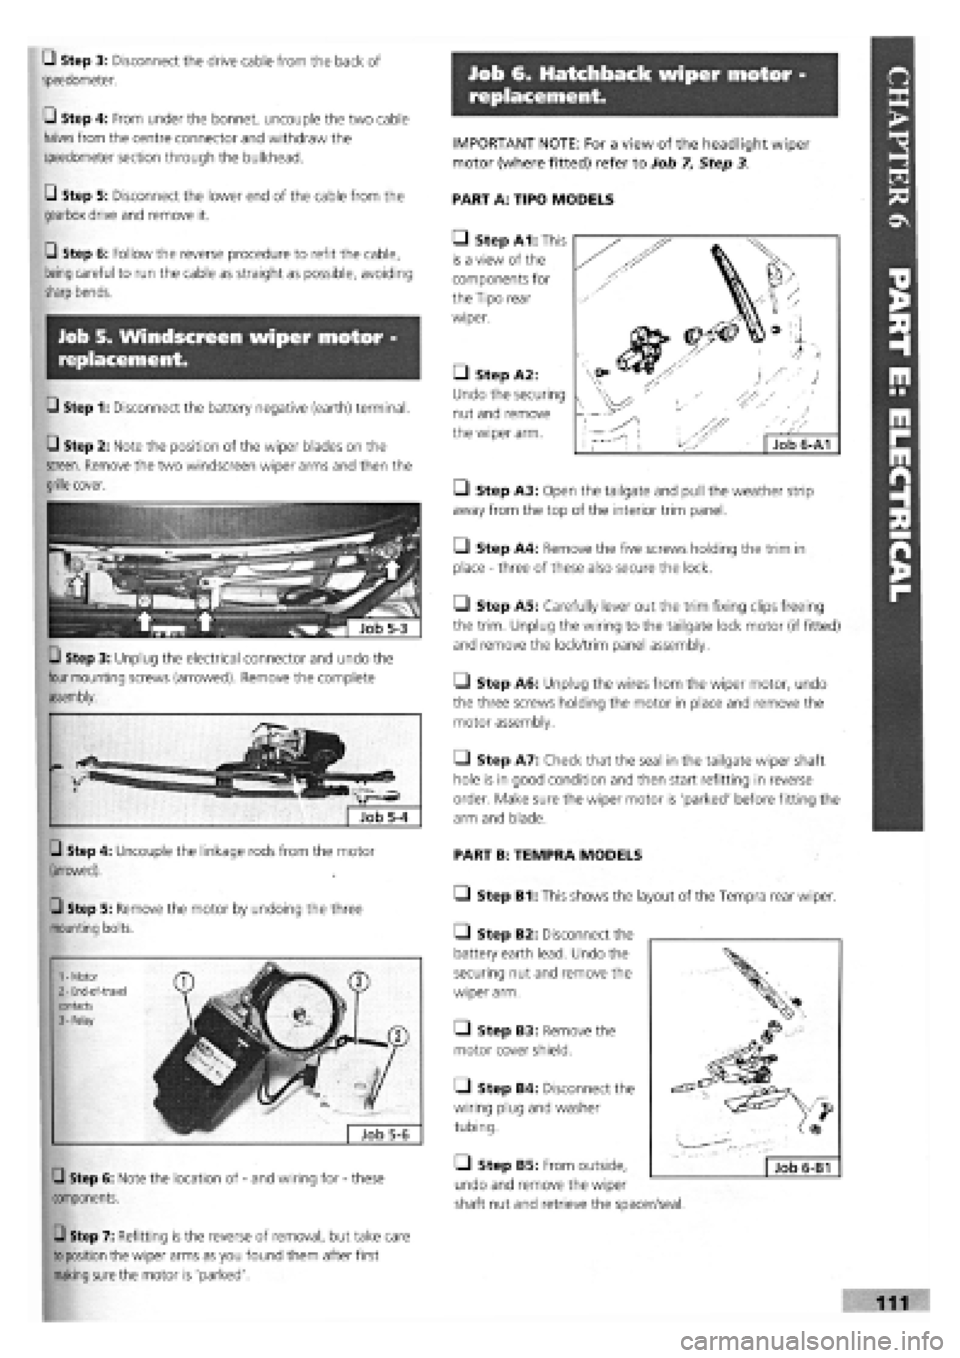 FIAT TEMPRA 1988  Service And Repair Manual 
Job 6. Hatchback wiper motor -
replacement. 
• Step 3: Disconnect the drive cable from the back of 
speedometer. 
• Step 4: From under the bonnet, uncouple the two cable 

halves
 from the centre